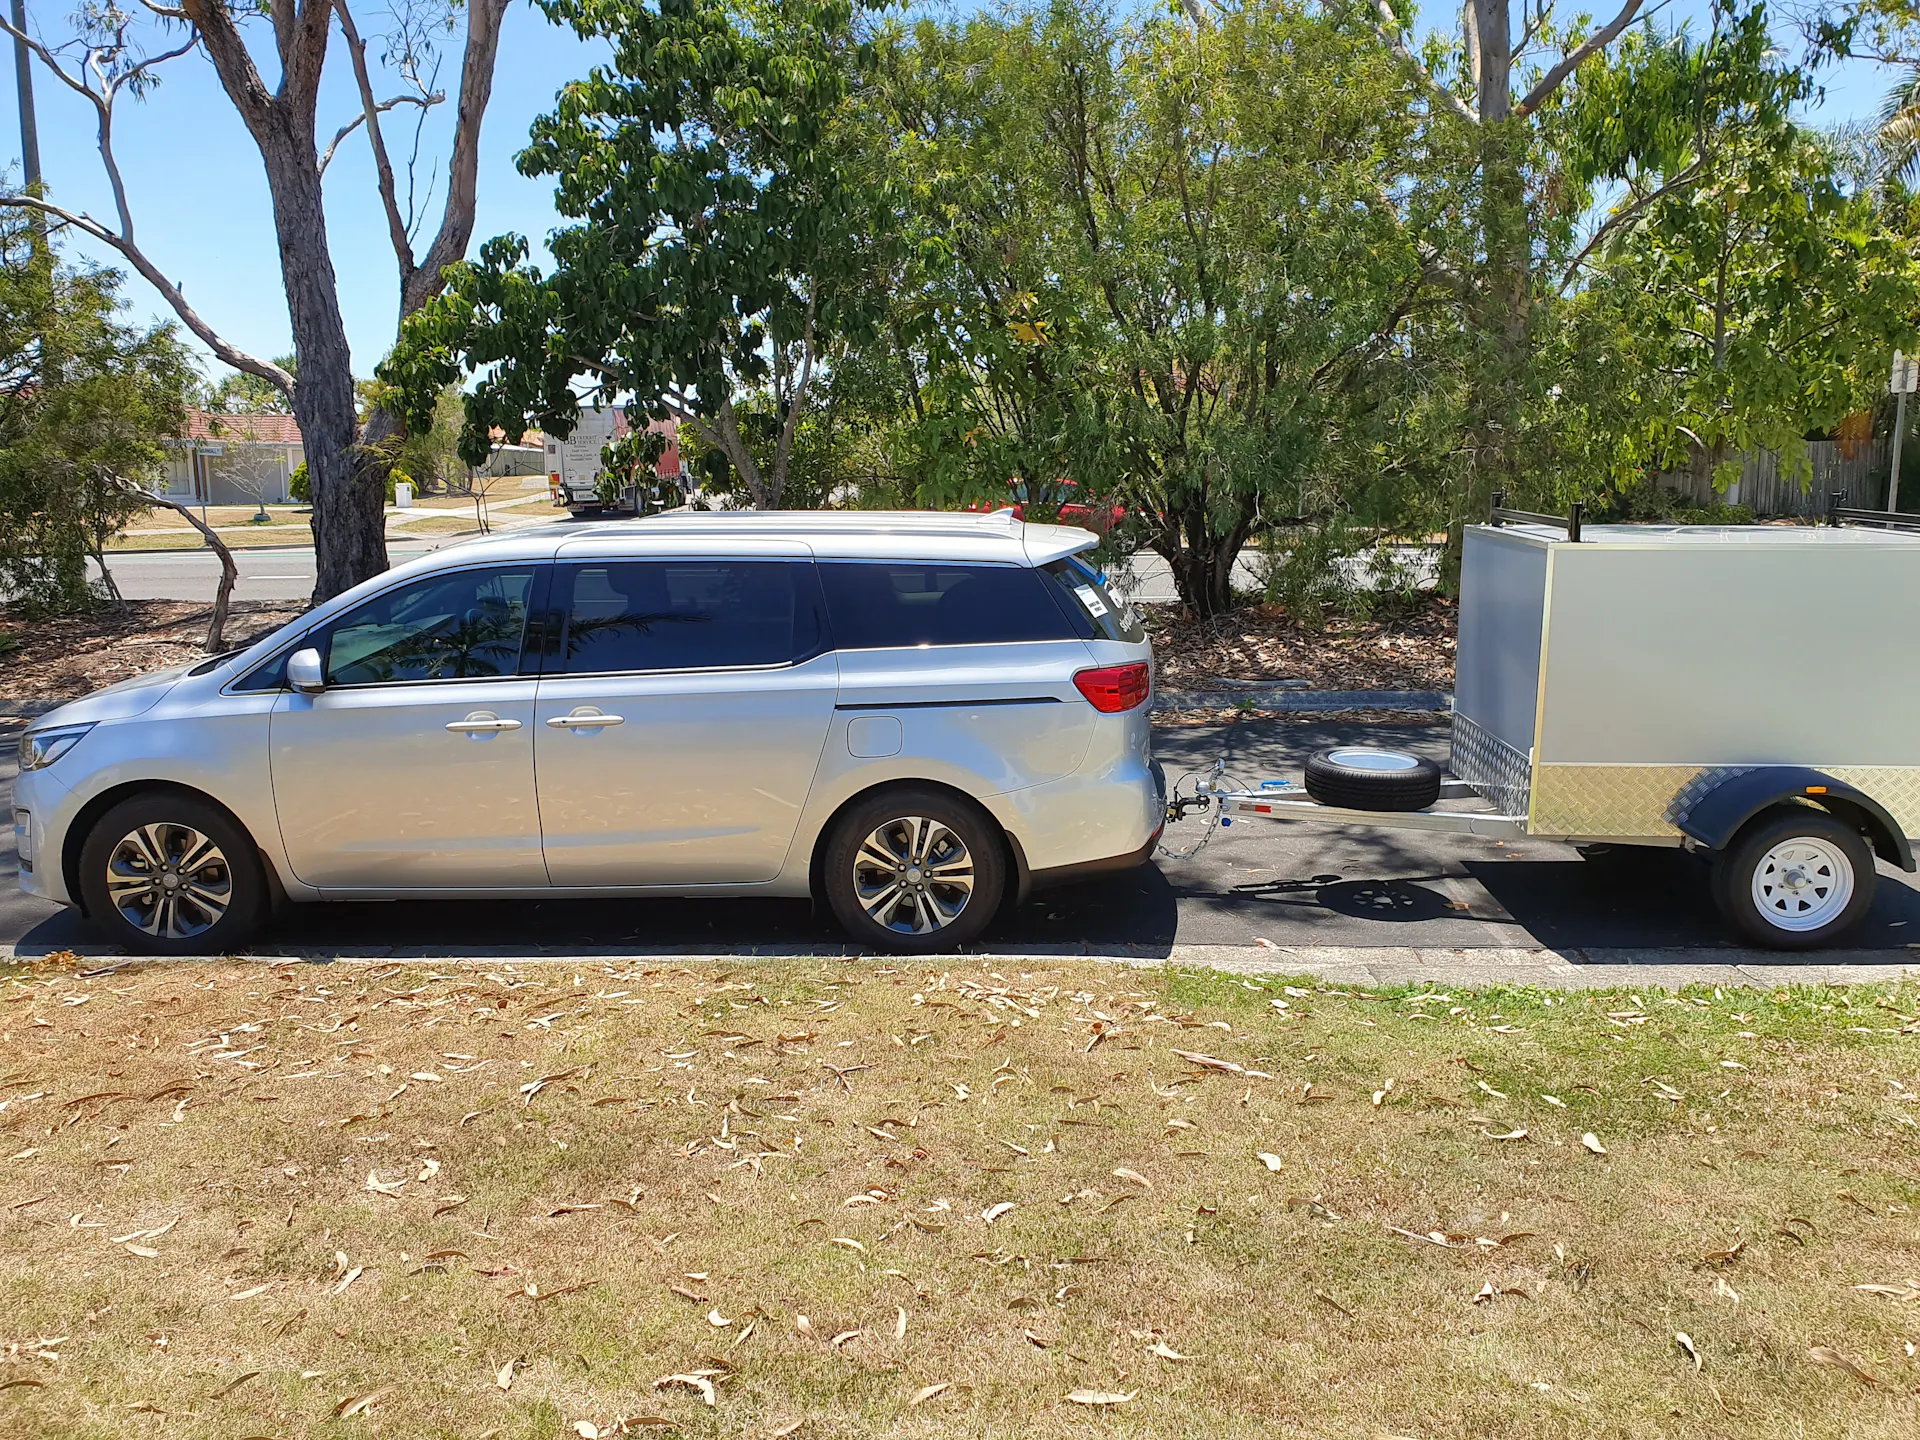 SkyDrive's first Kia Carnival and trailer